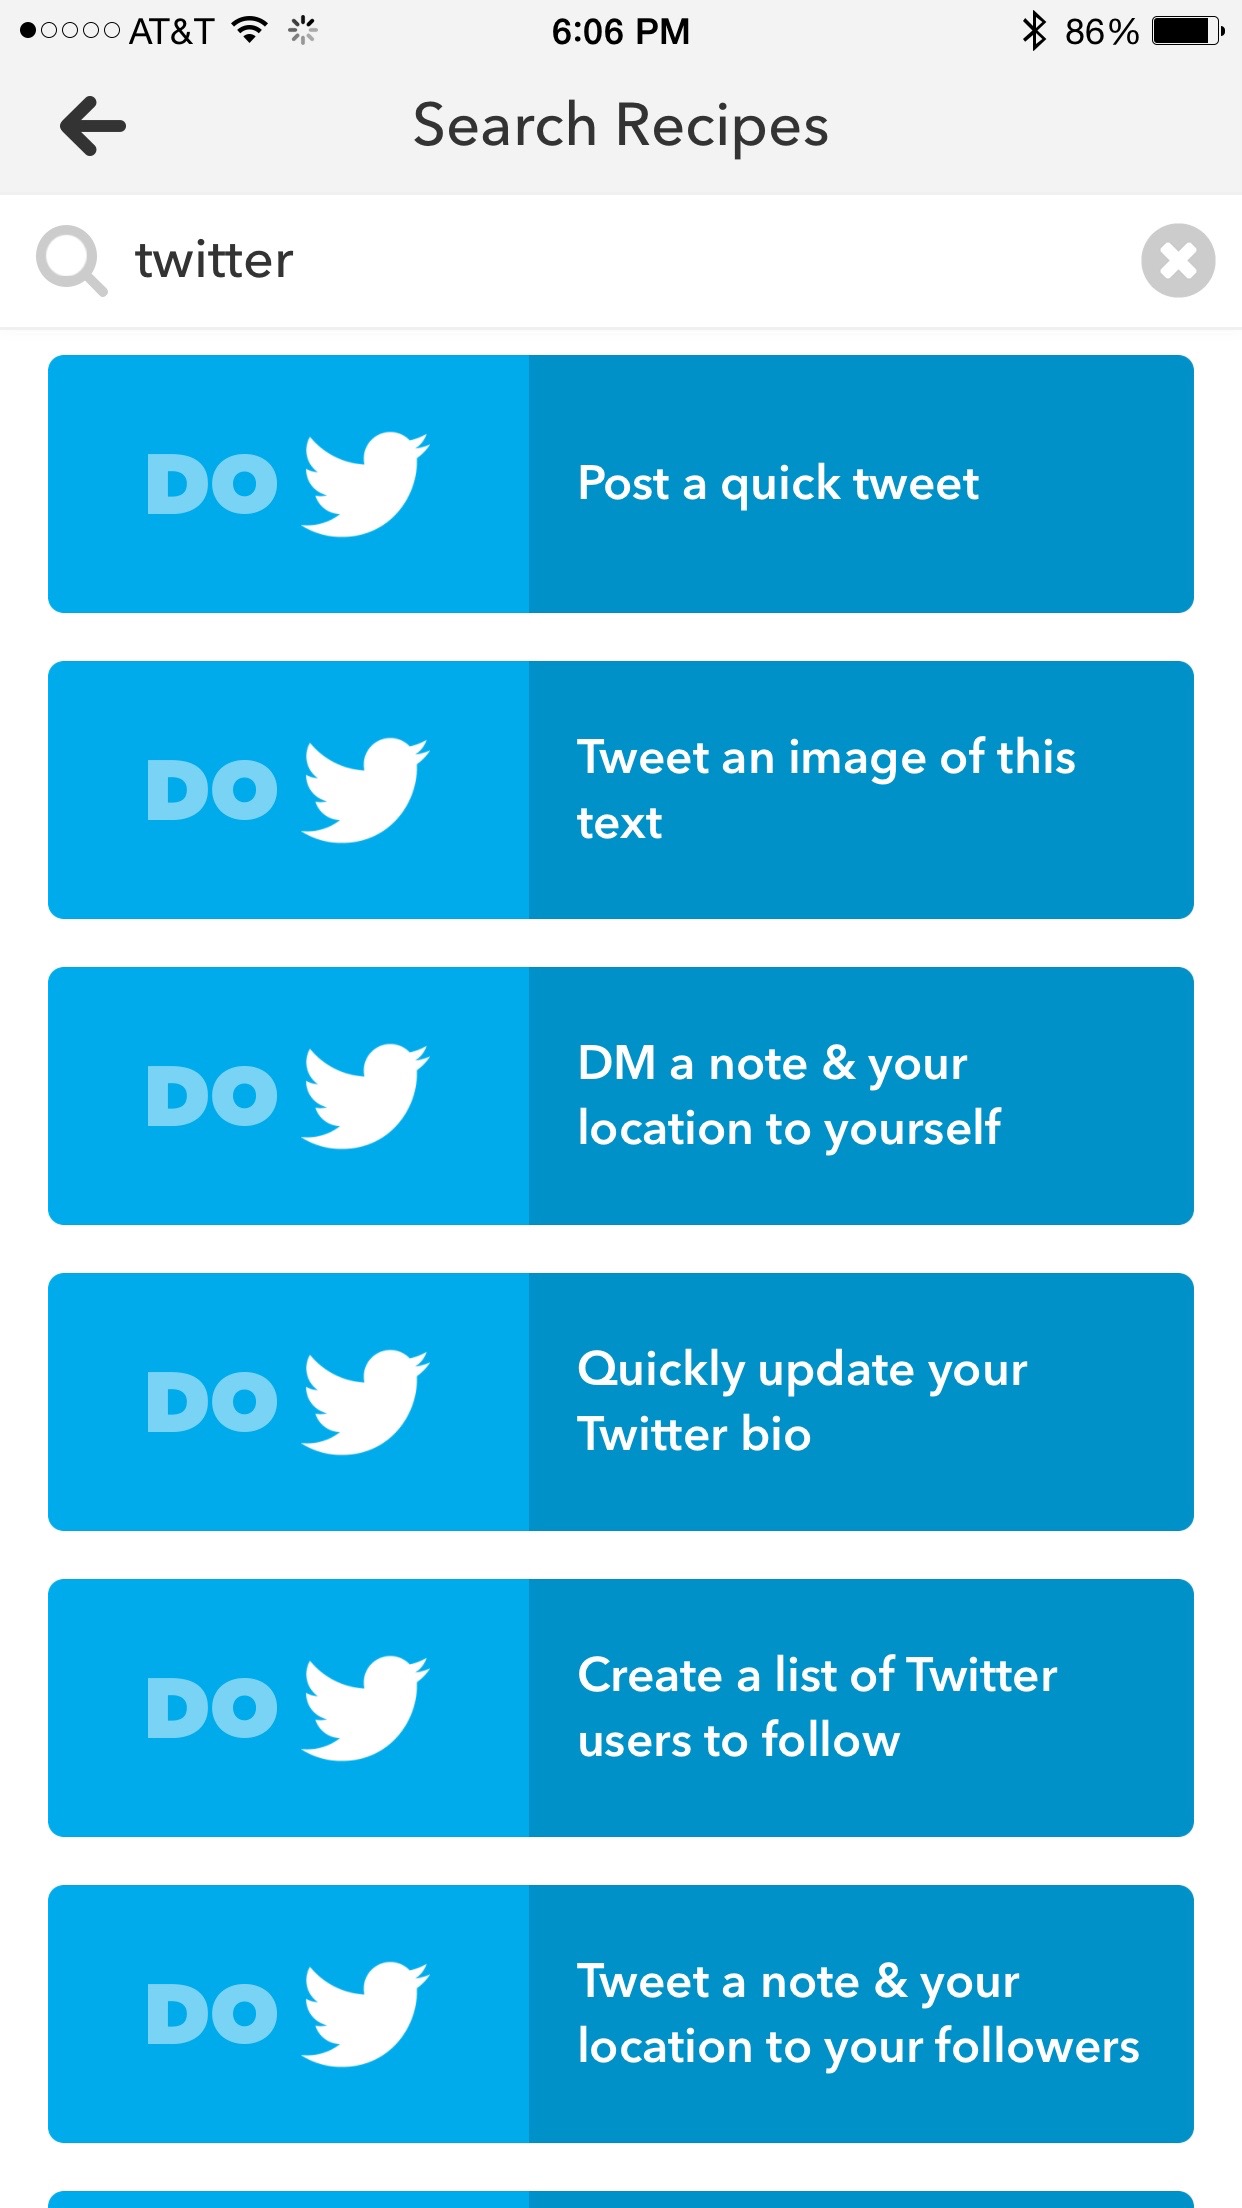 Twitter and Do Note by IFTTT